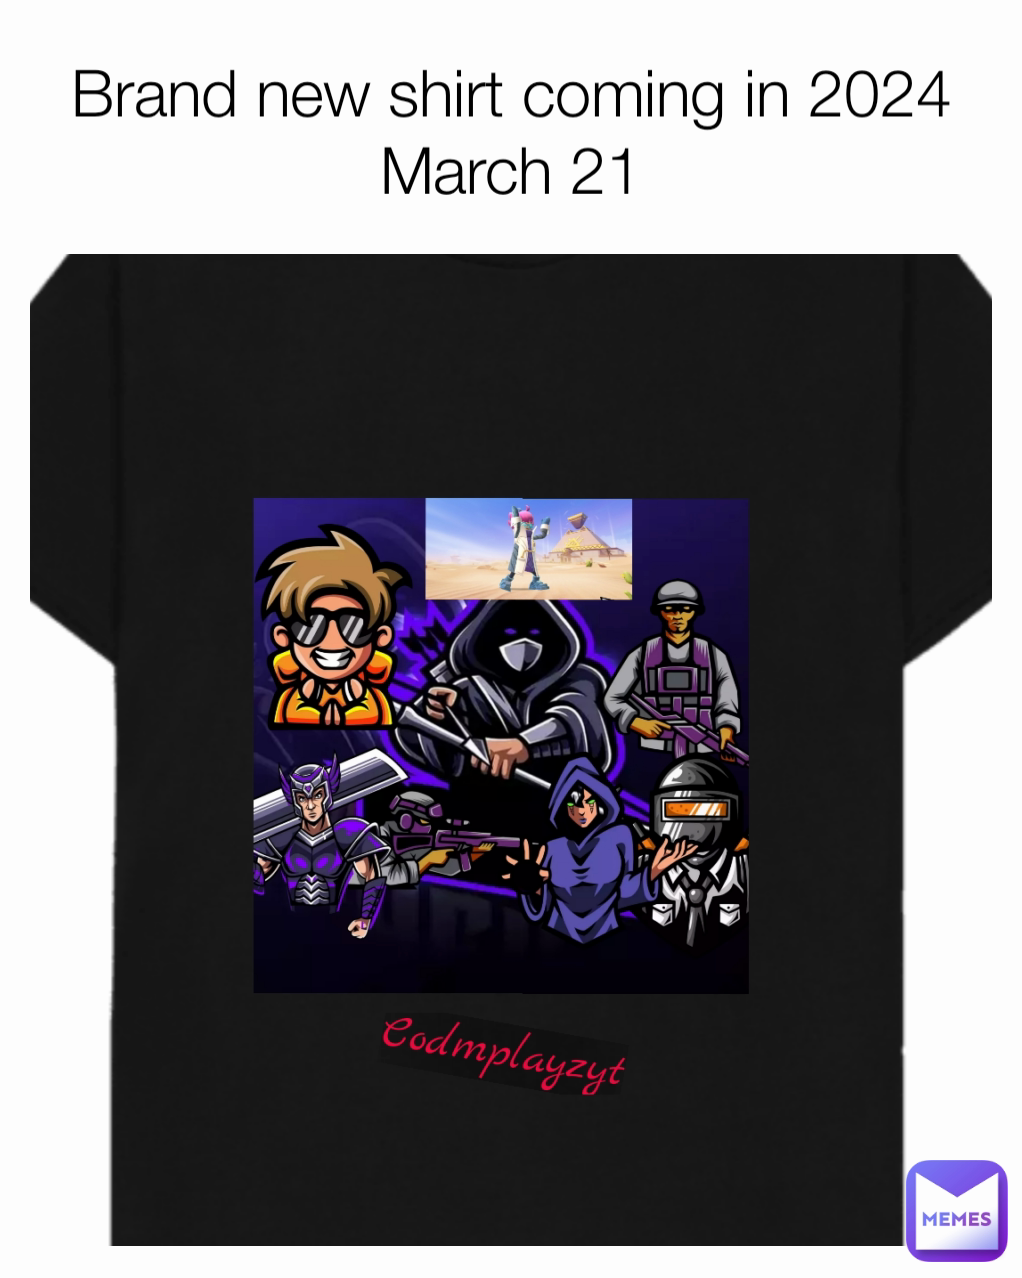 Brand new shirt coming in 2024 March 21